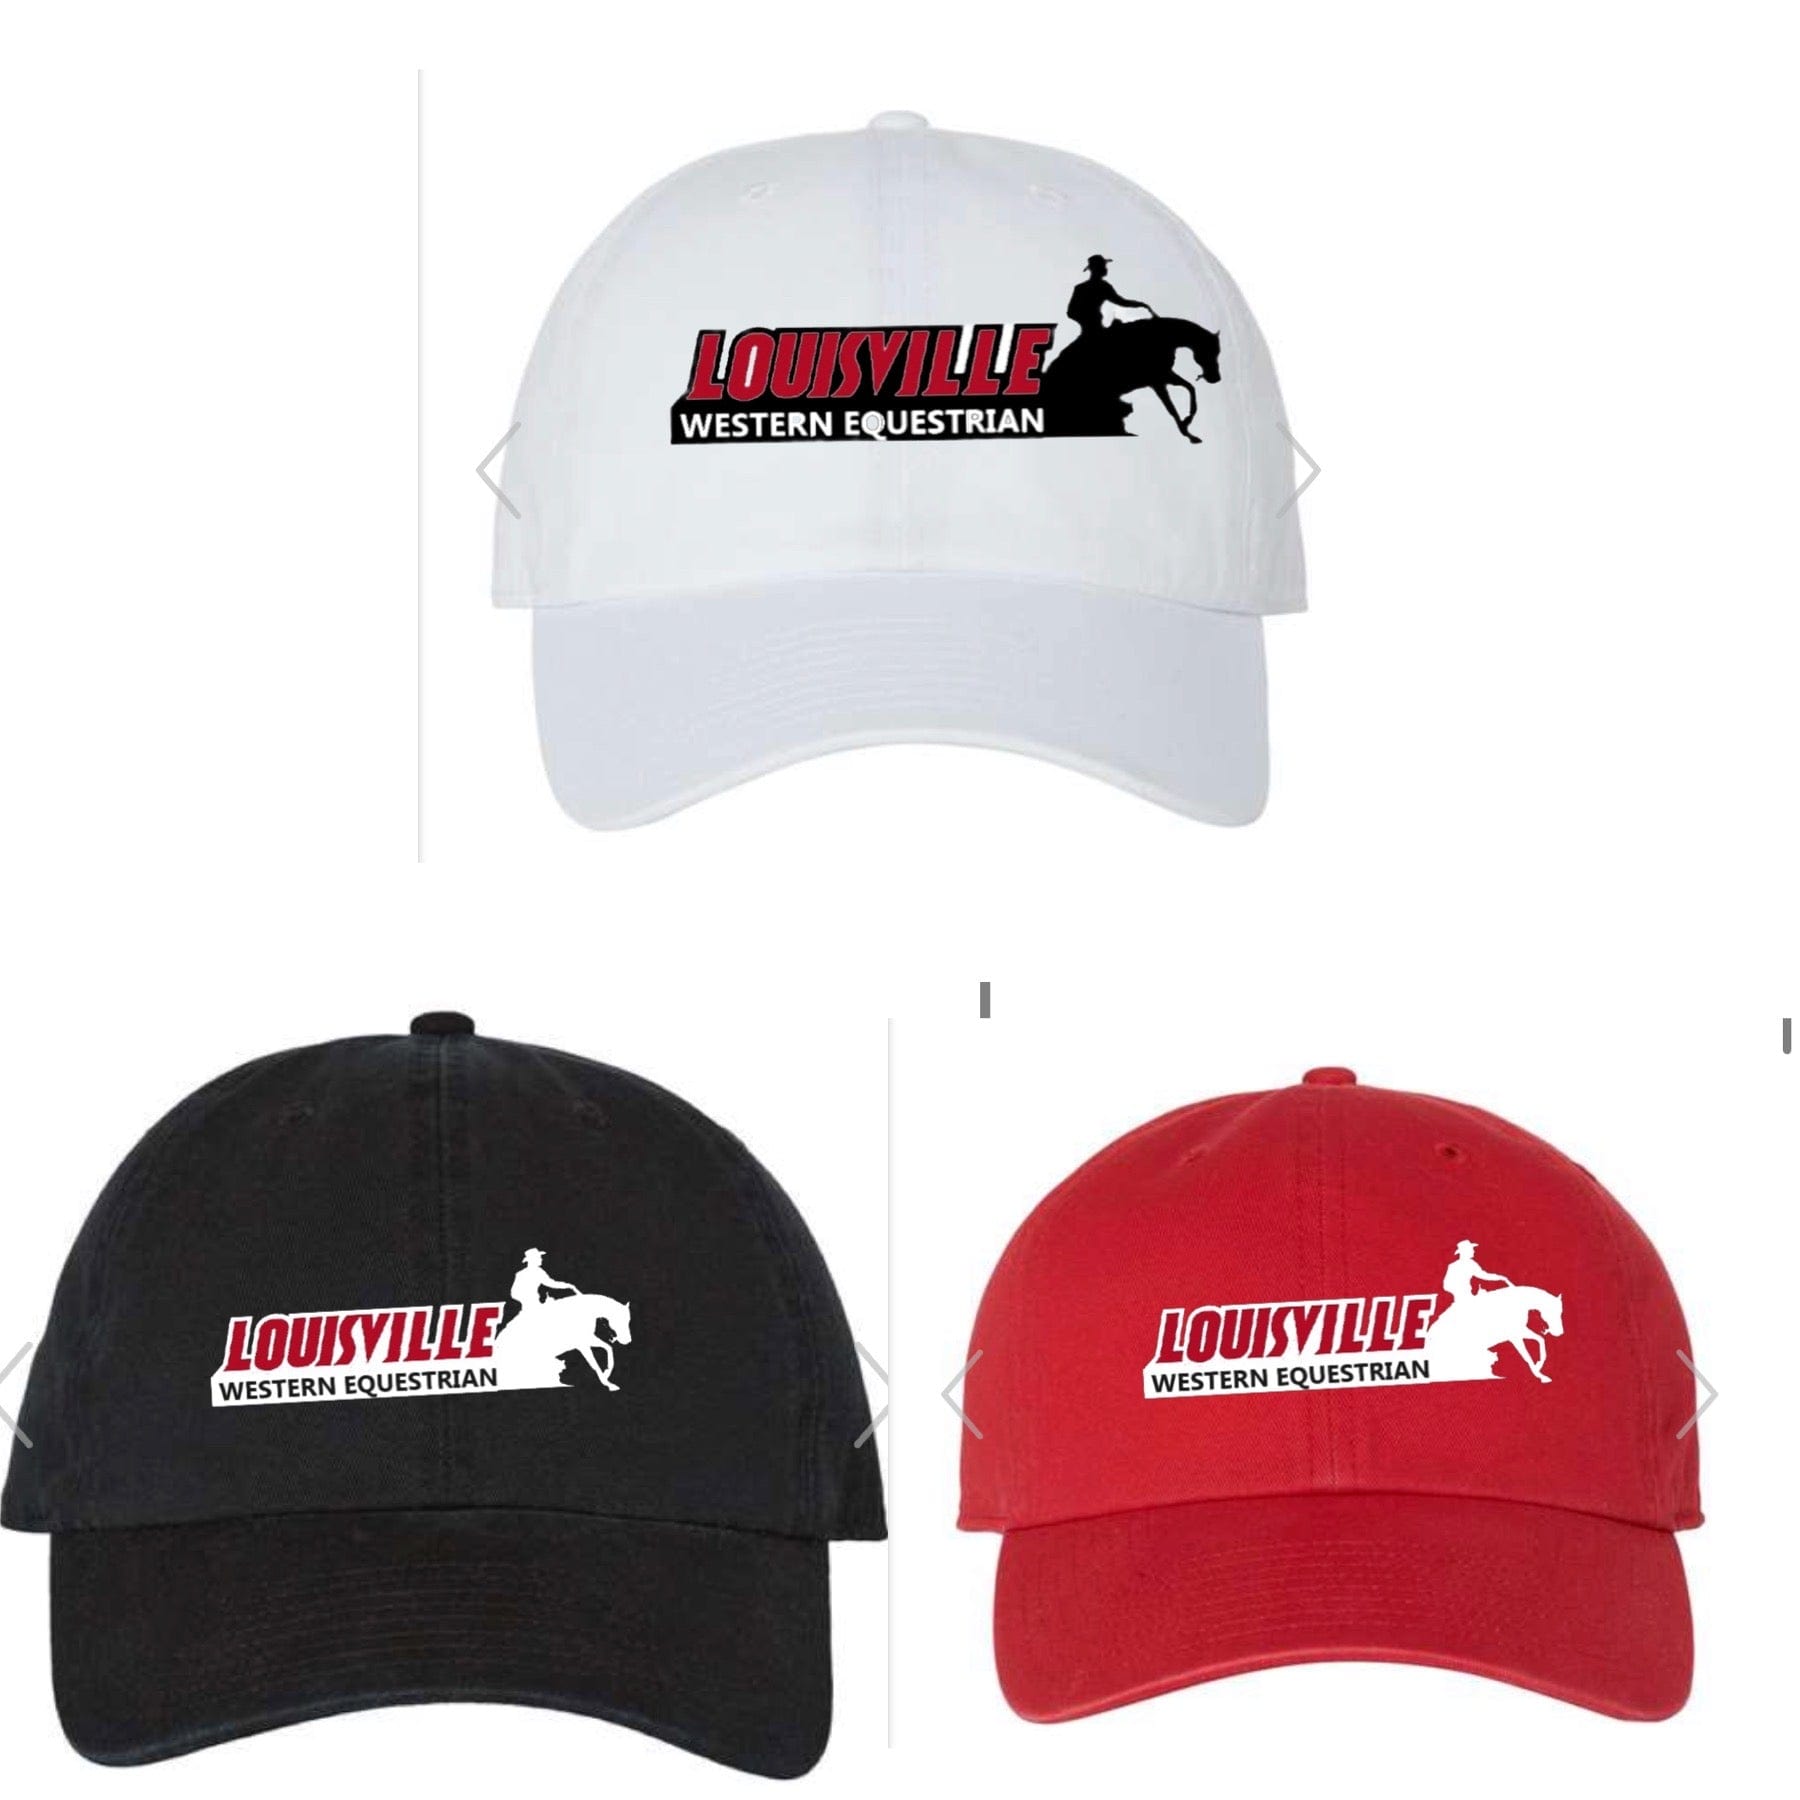 Equestrian Team Apparel Louisville Western Equestrian Team Baseball Cap equestrian team apparel online tack store mobile tack store custom farm apparel custom show stable clothing equestrian lifestyle horse show clothing riding clothes horses equestrian tack store